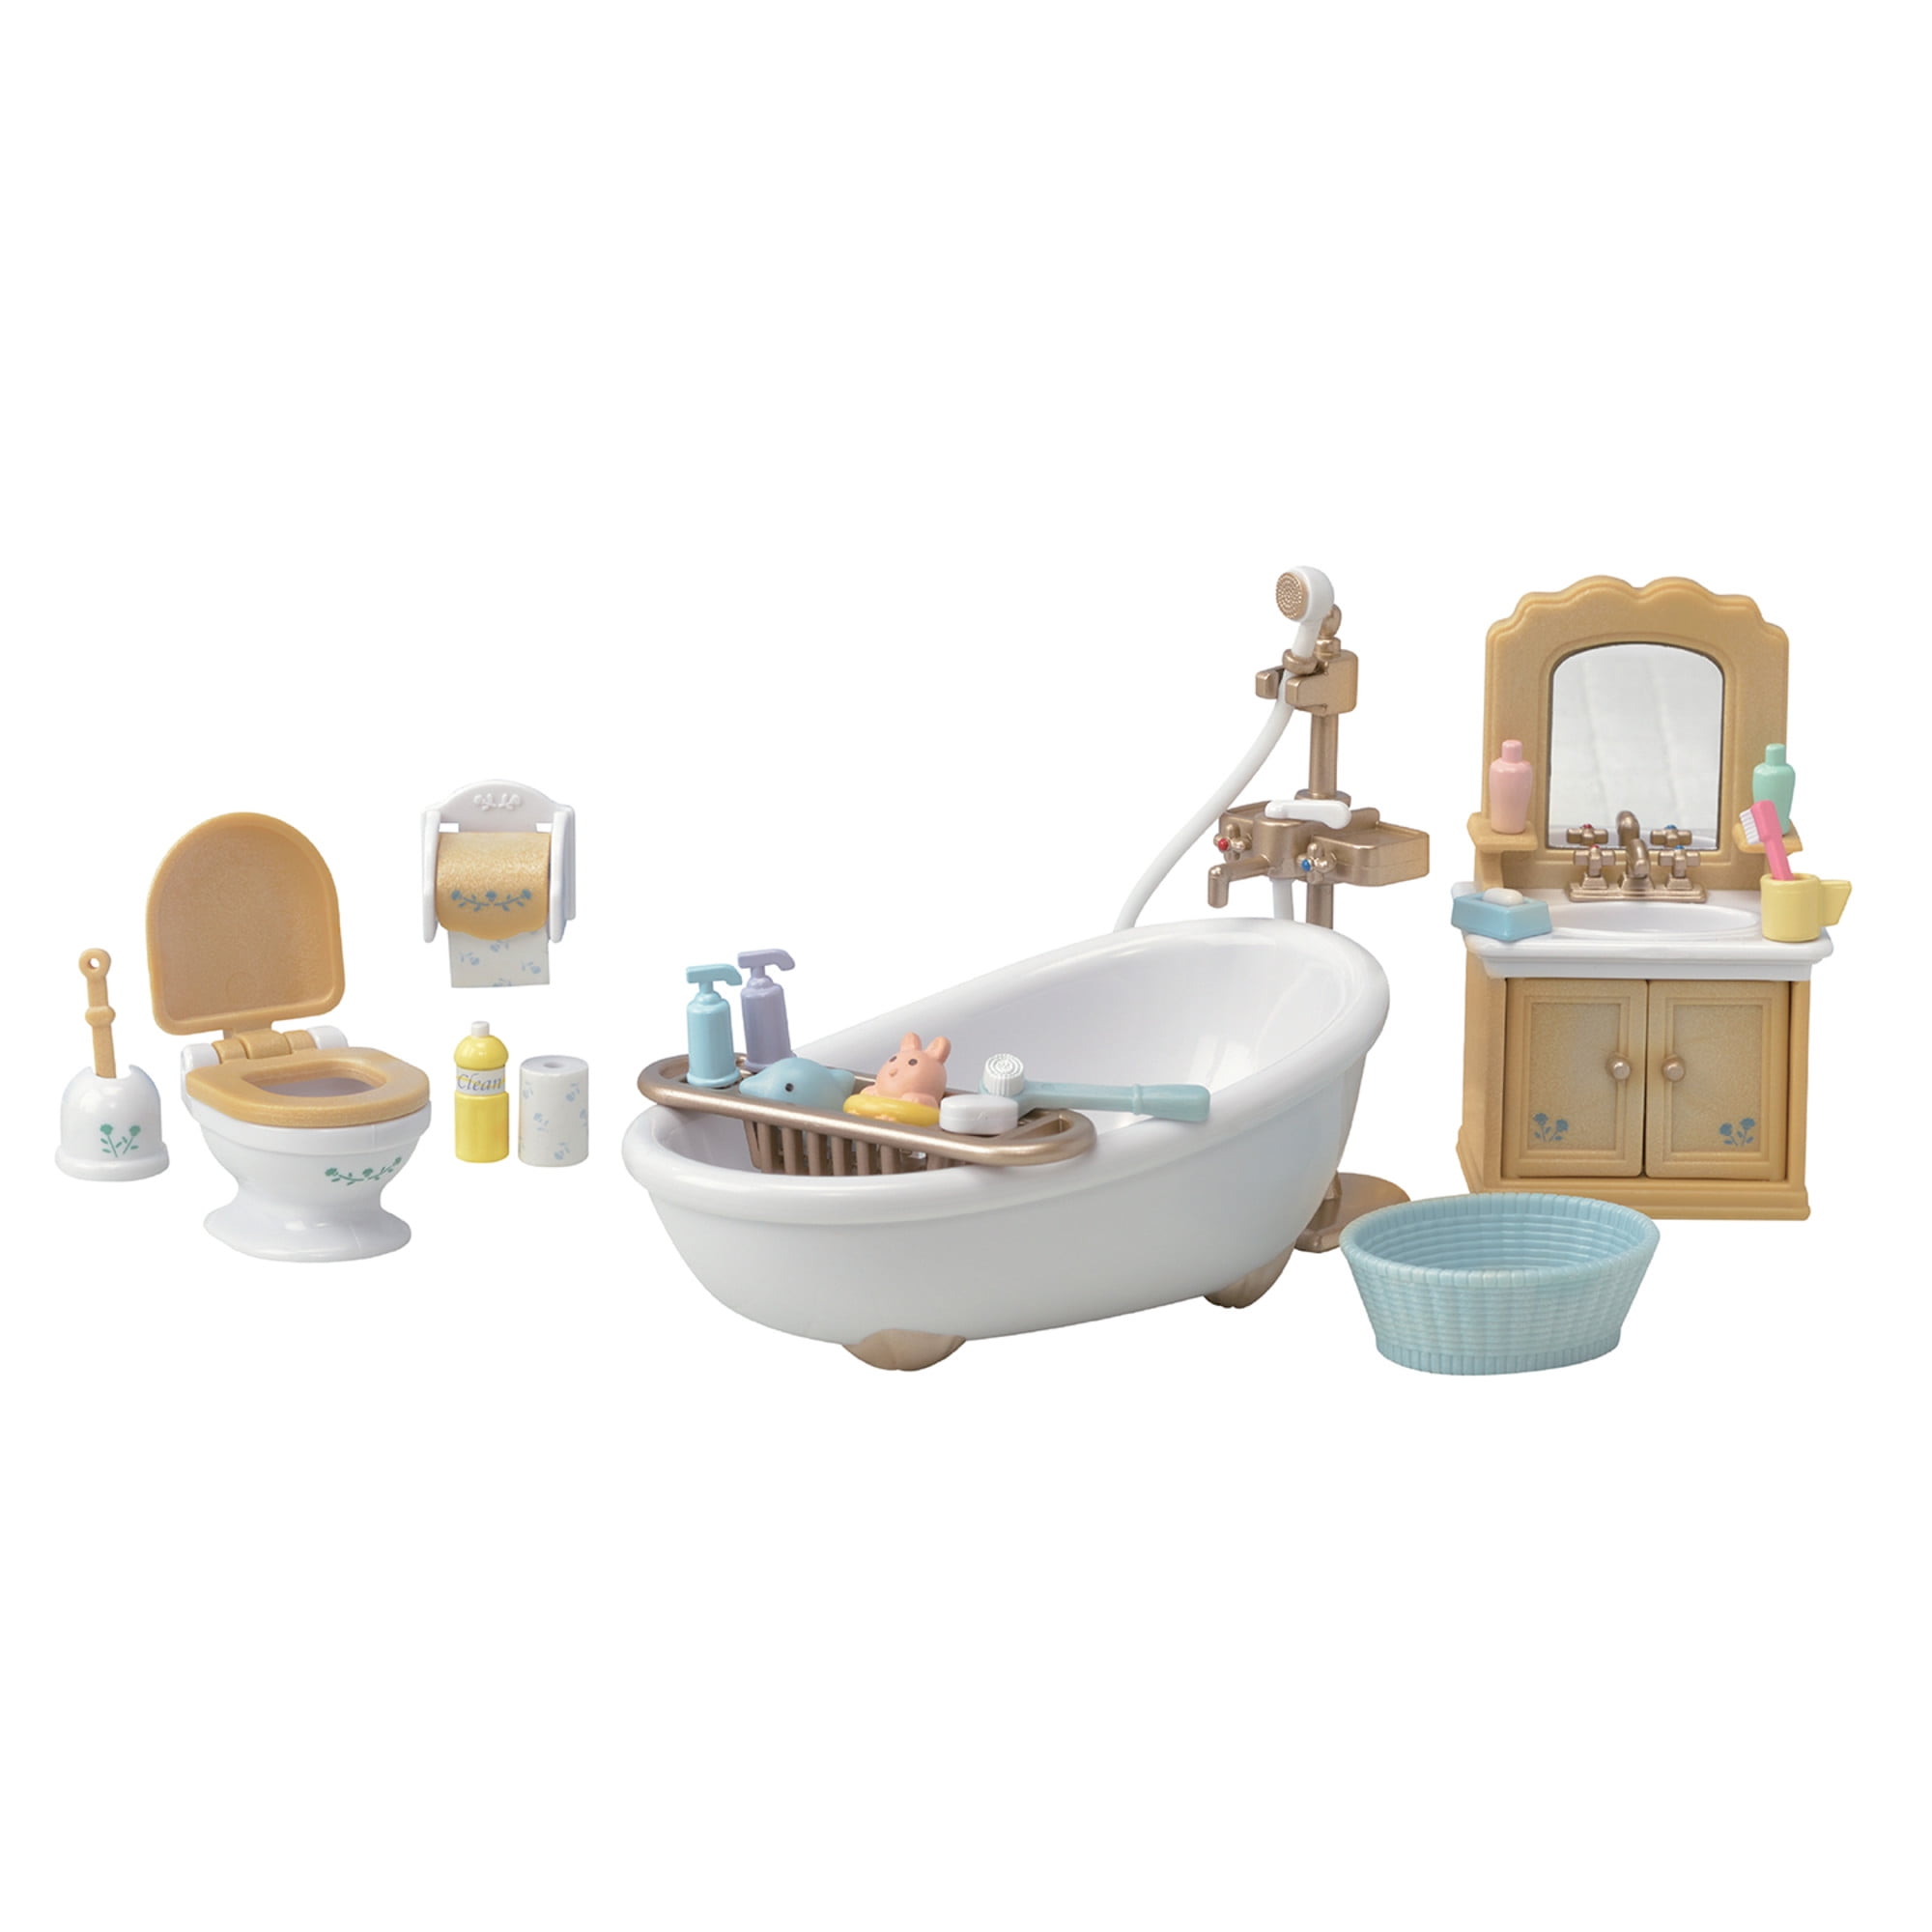 Sylvanian Families Toilet Set Bathroom Furniture Accessories Detailed Role Play 